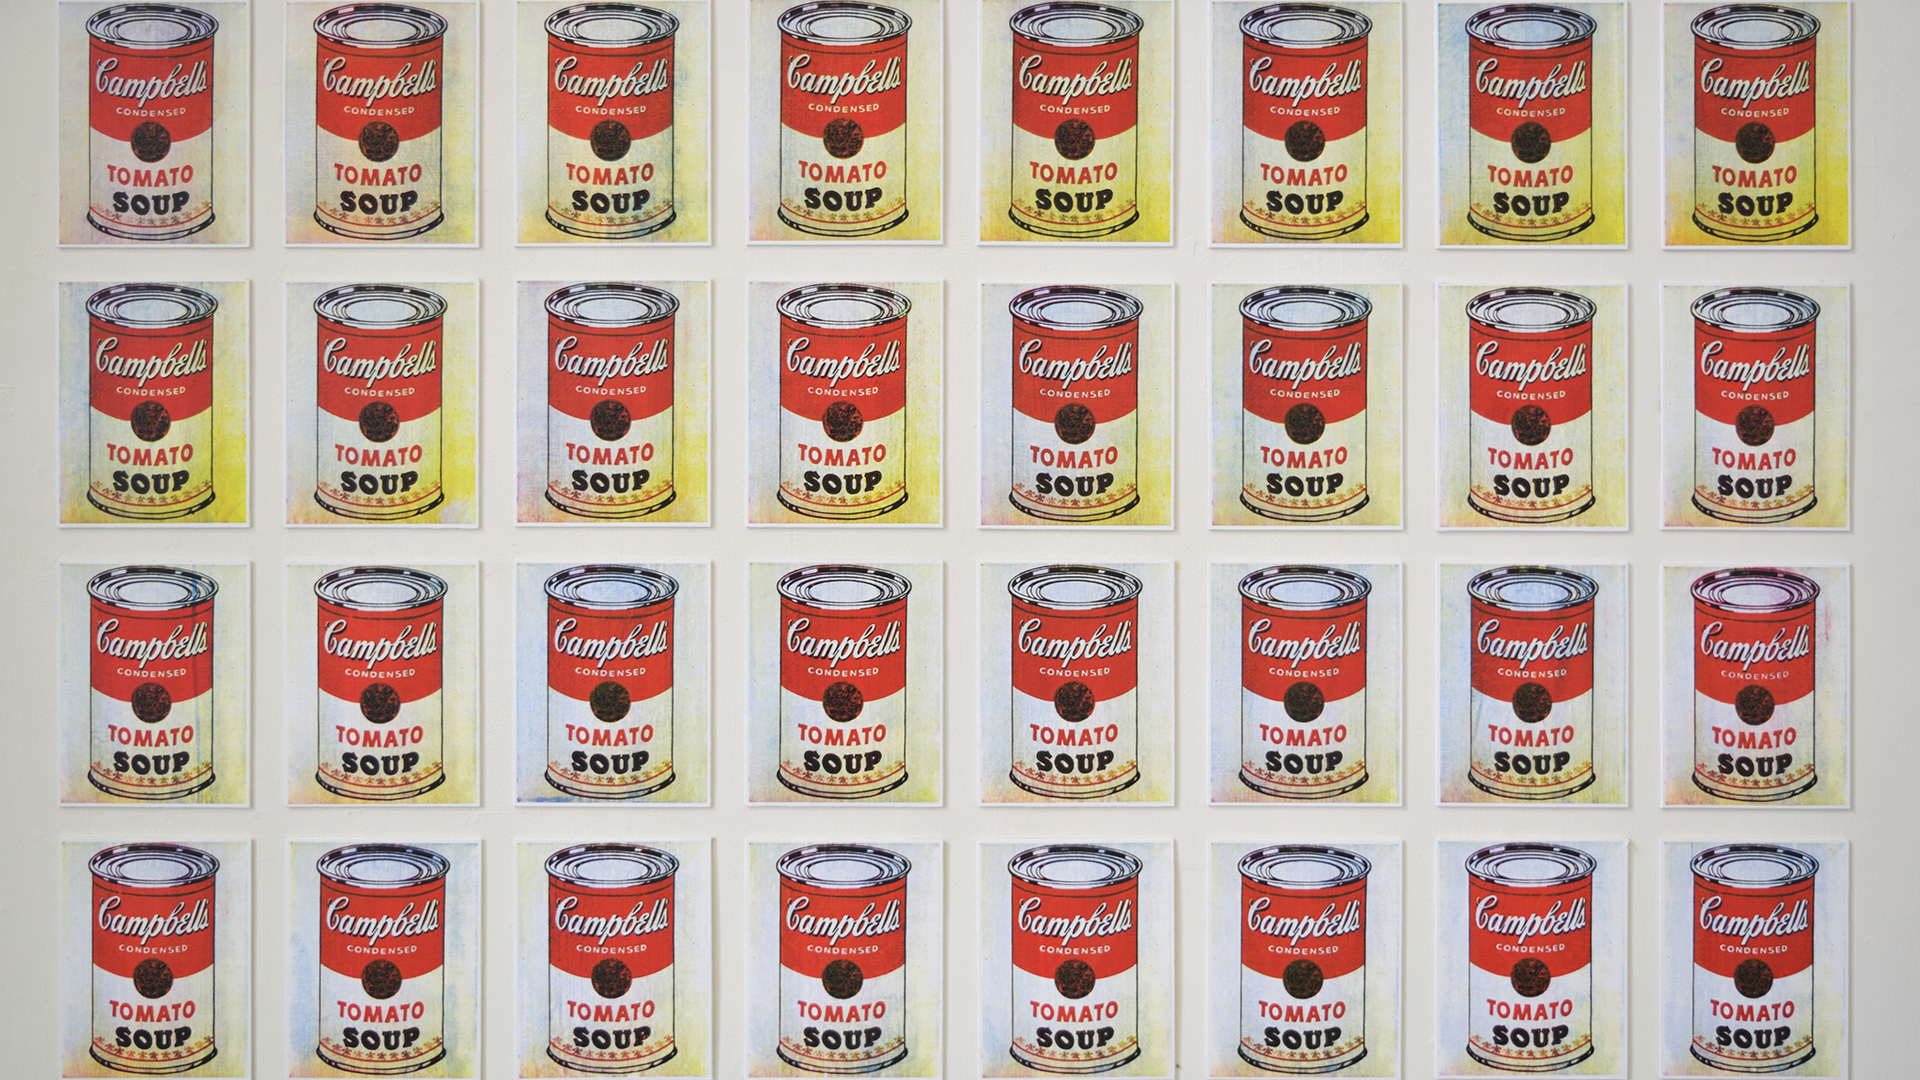 Andy Warhol's Campbell's Soup